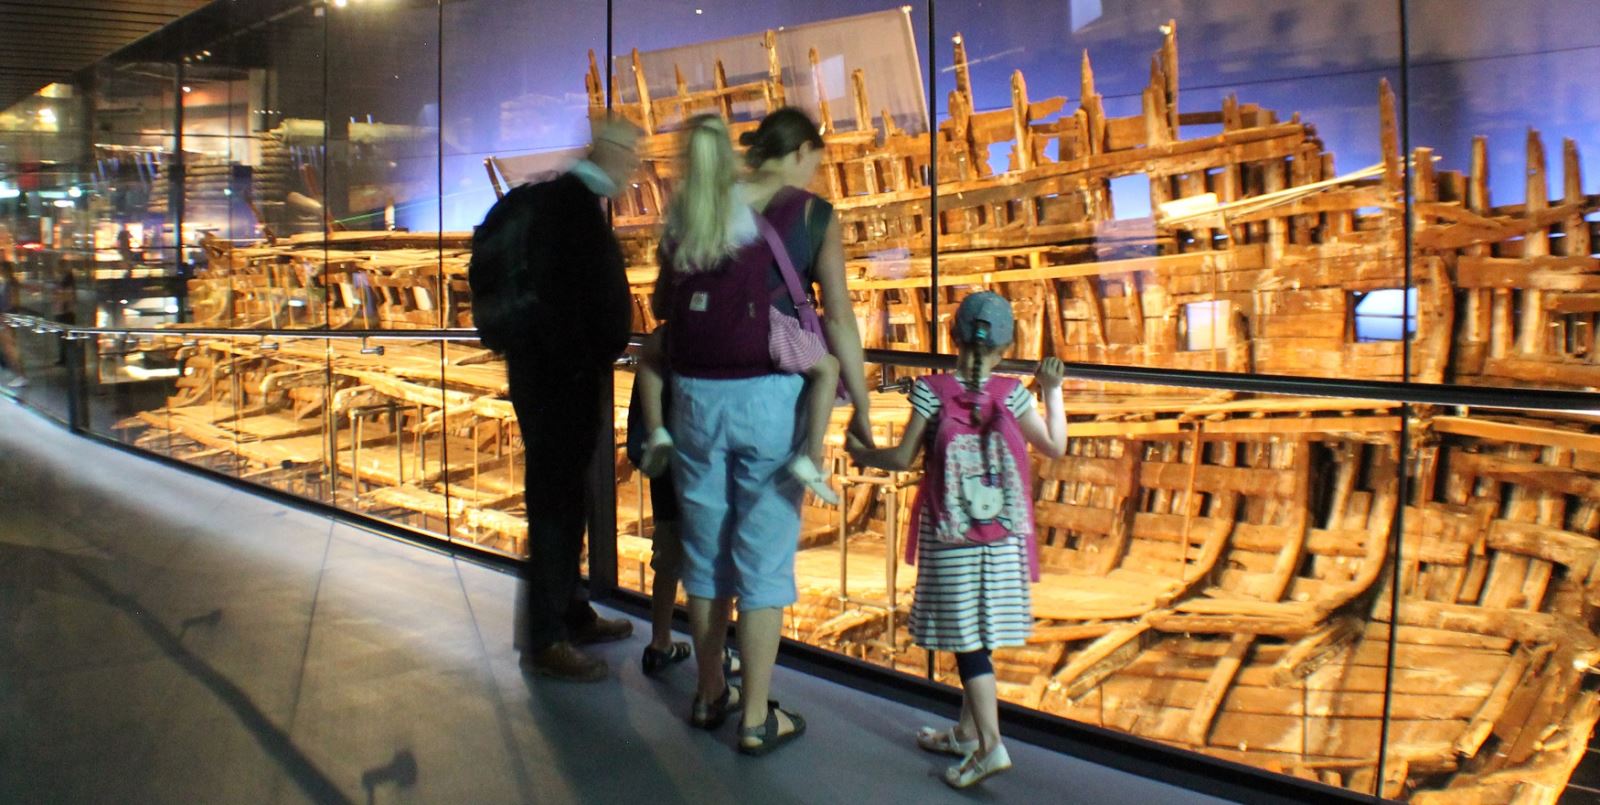 A family looks down at The Mary Rose